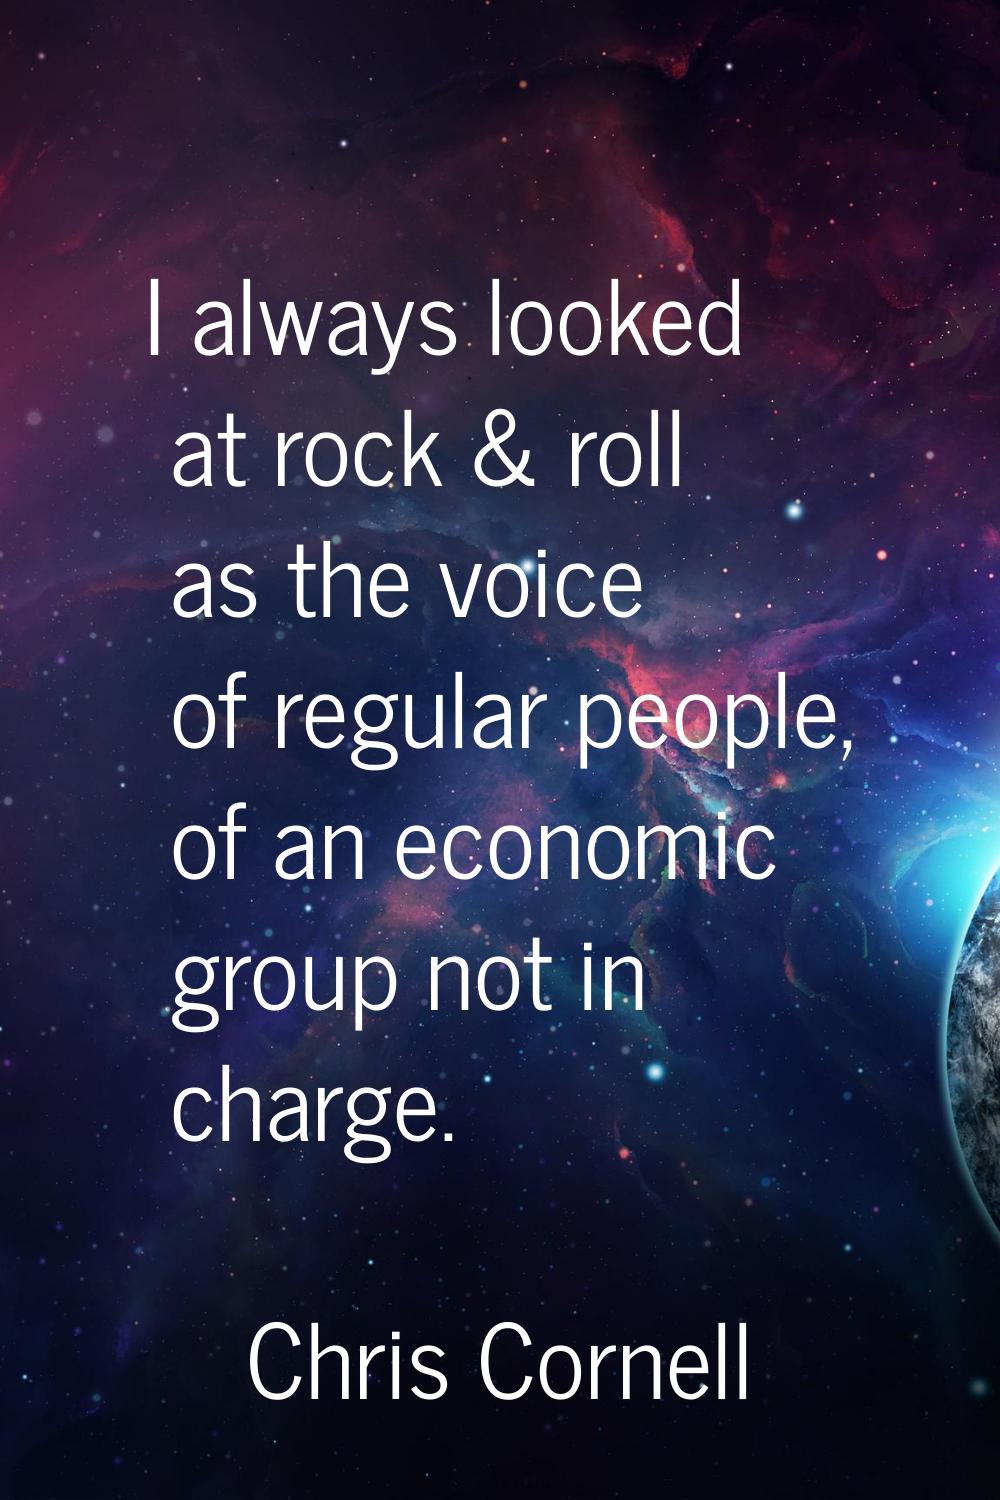 I always looked at rock & roll as the voice of regular people, of an economic group not in charge.